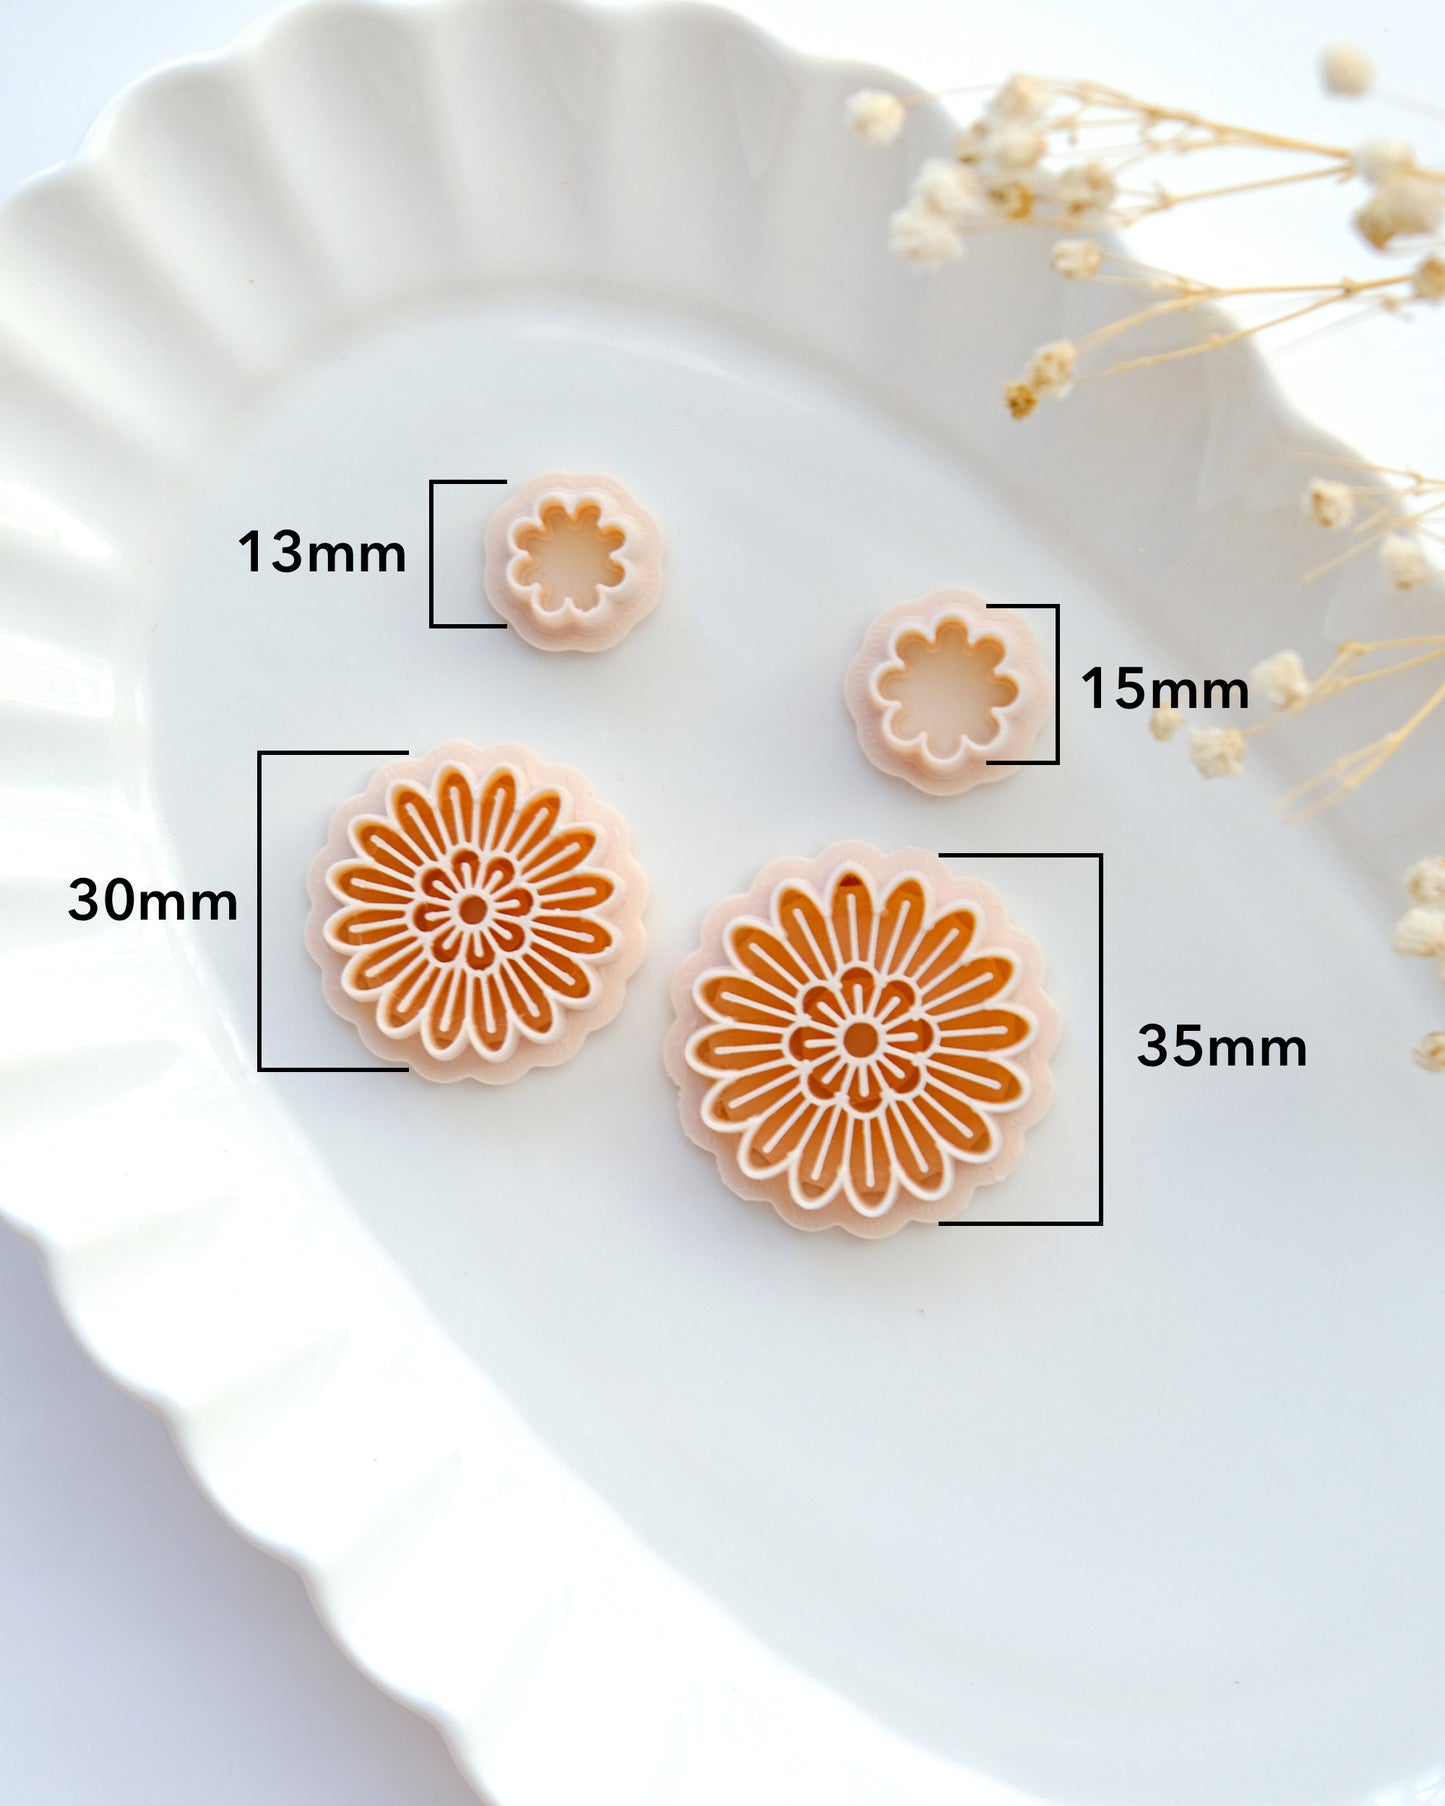 Summer Flower Polymer Clay Cutters | Spring Clay Cutters | Floral Cutters for Earring Making | Clay Tools